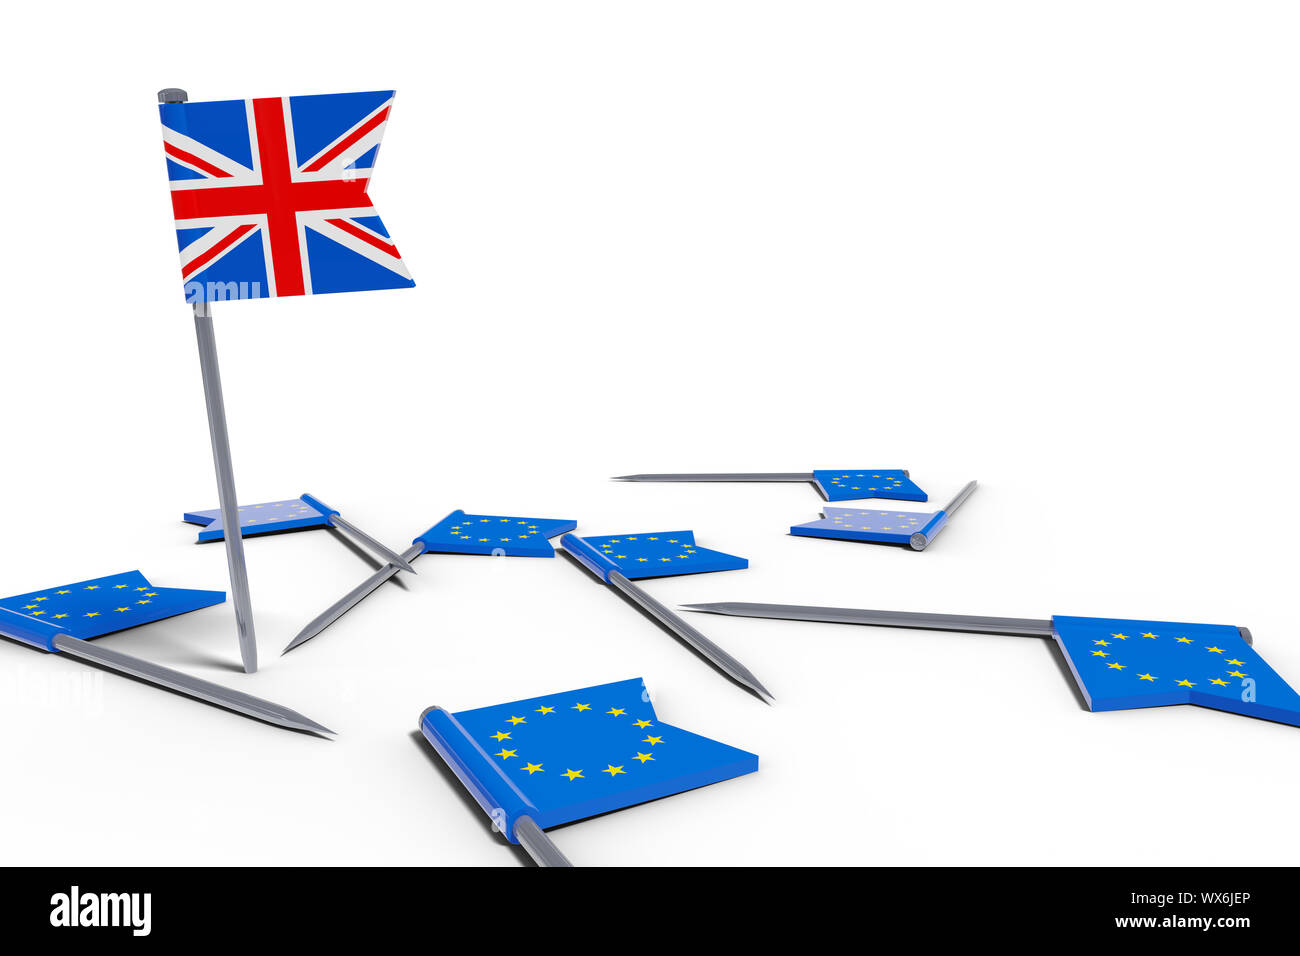 needles with europe flags and the uk flag brexit chaos symbolism Stock Photo